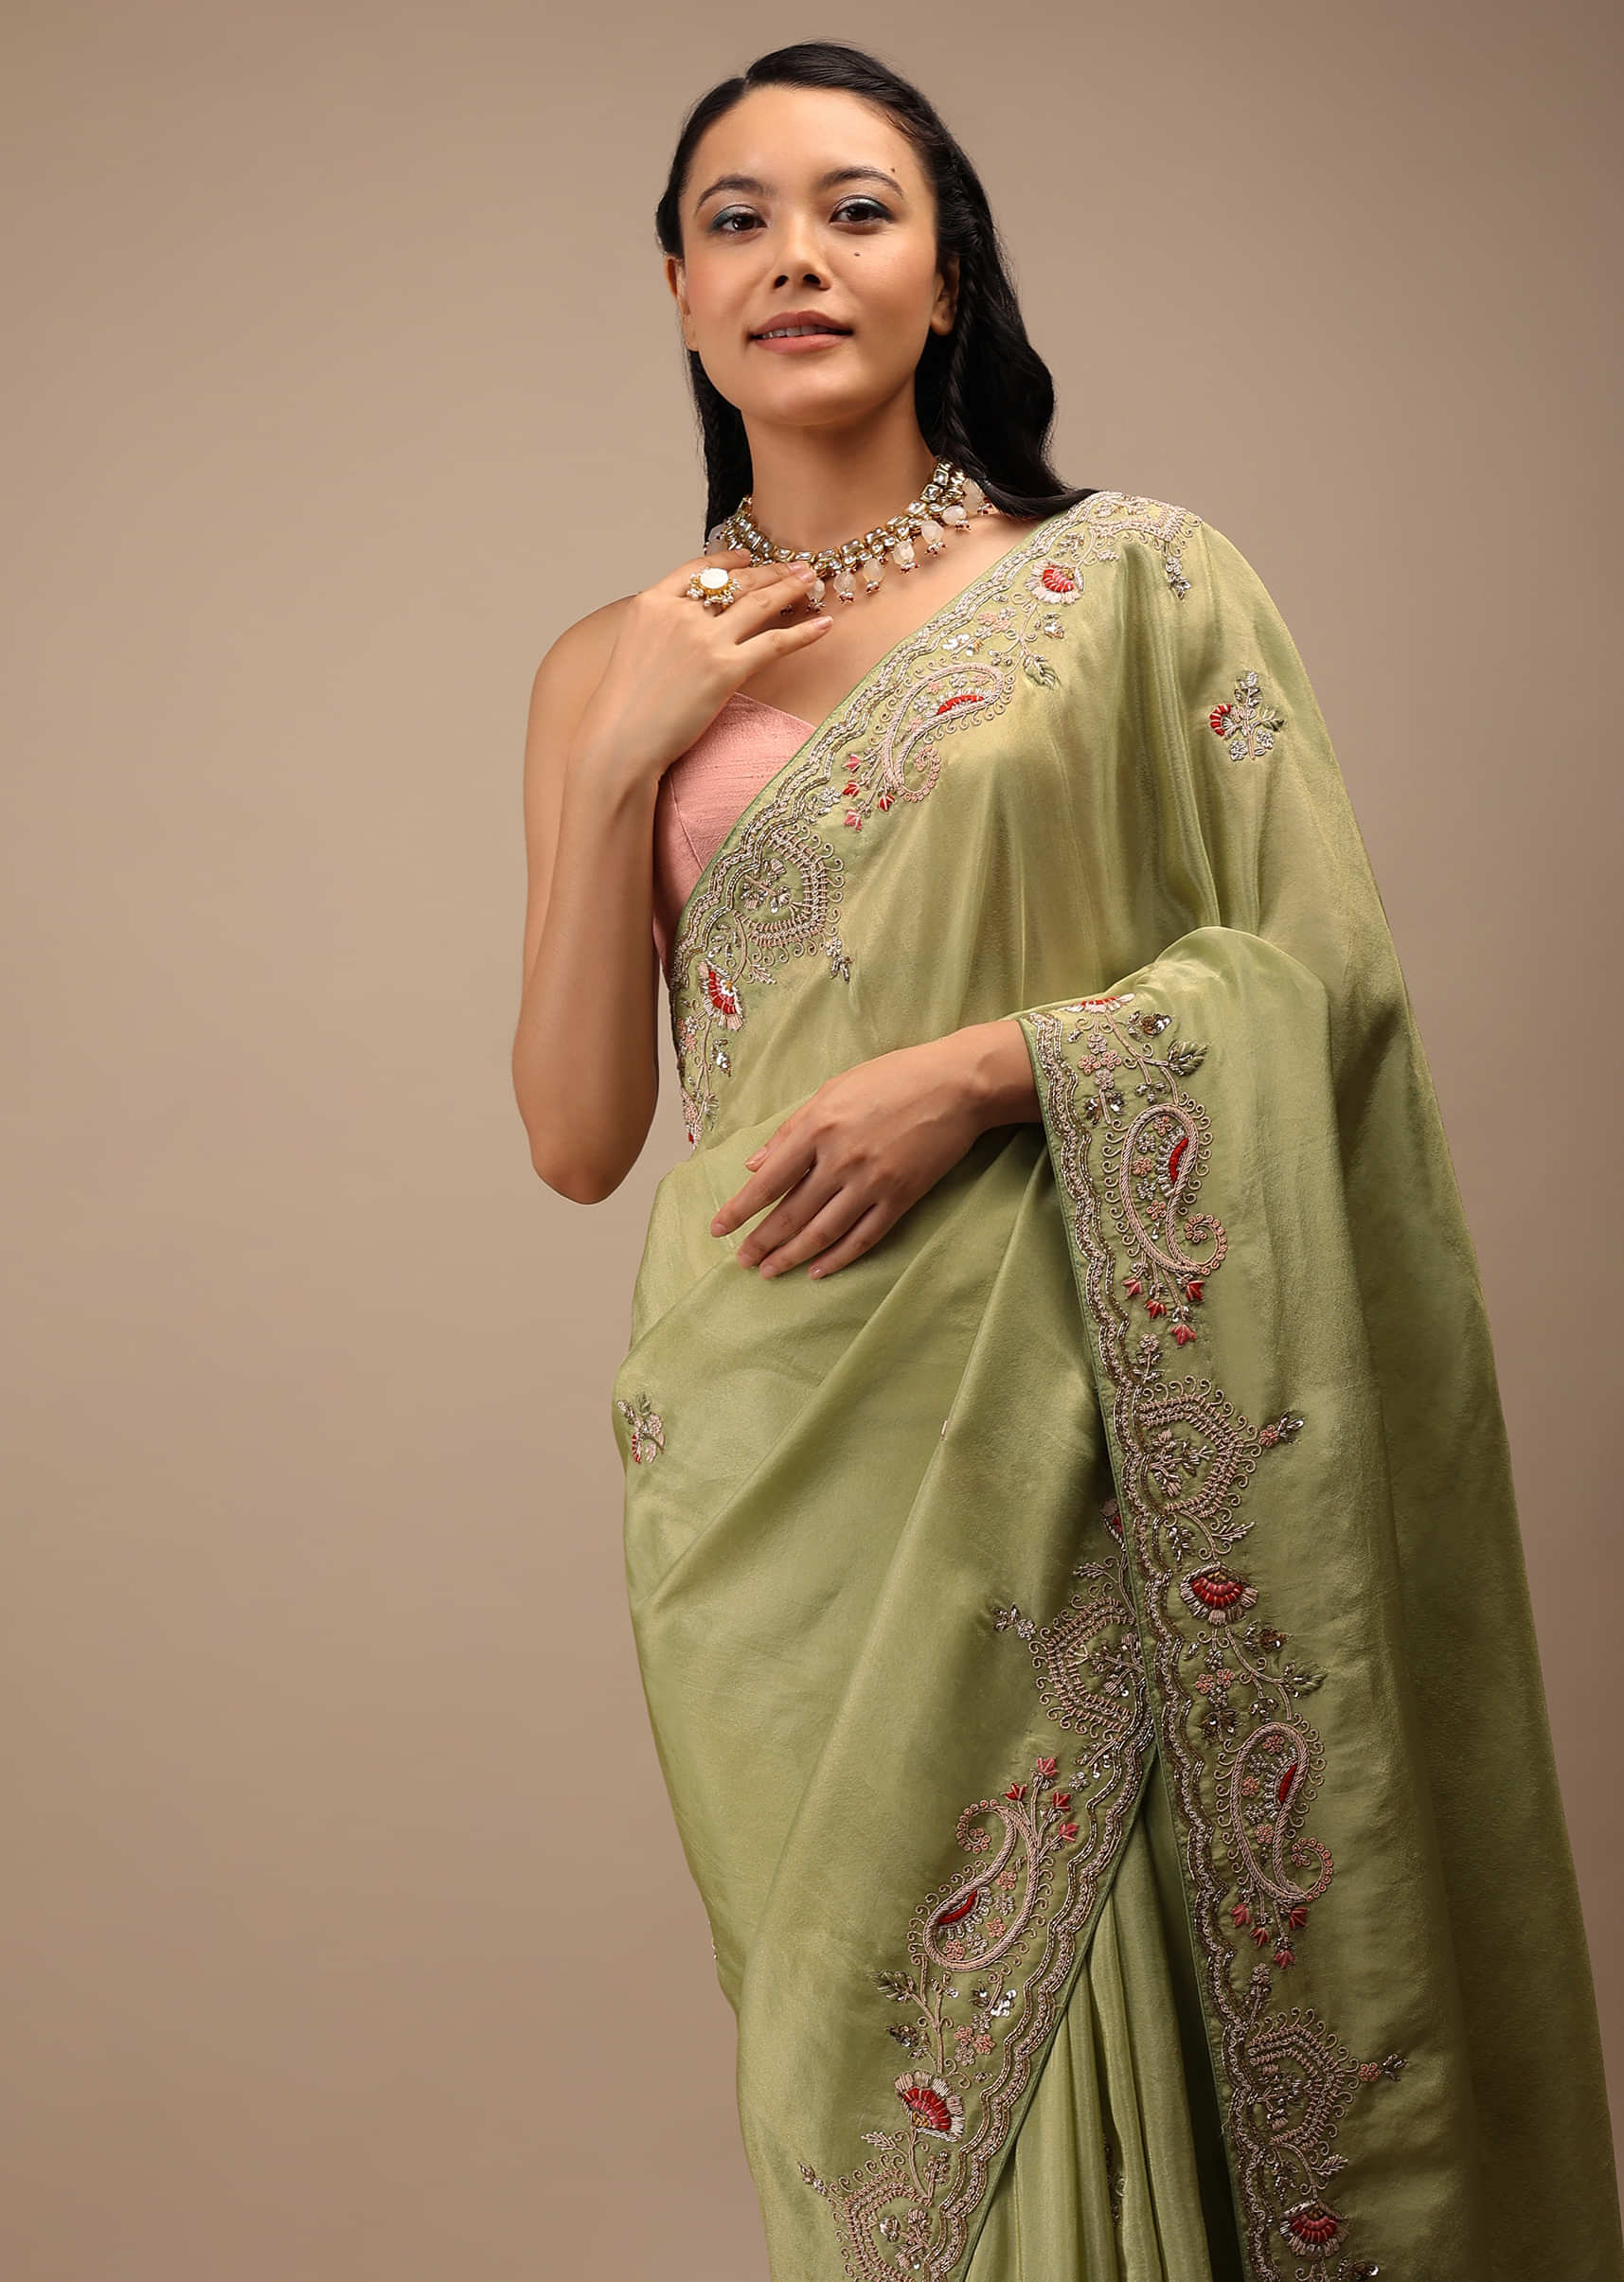 Beechnut Green Tissue Saree In Zardozi Embroidery Buttis, It Comes In An Embroidery Border In Multi-Color French Knots Detailing